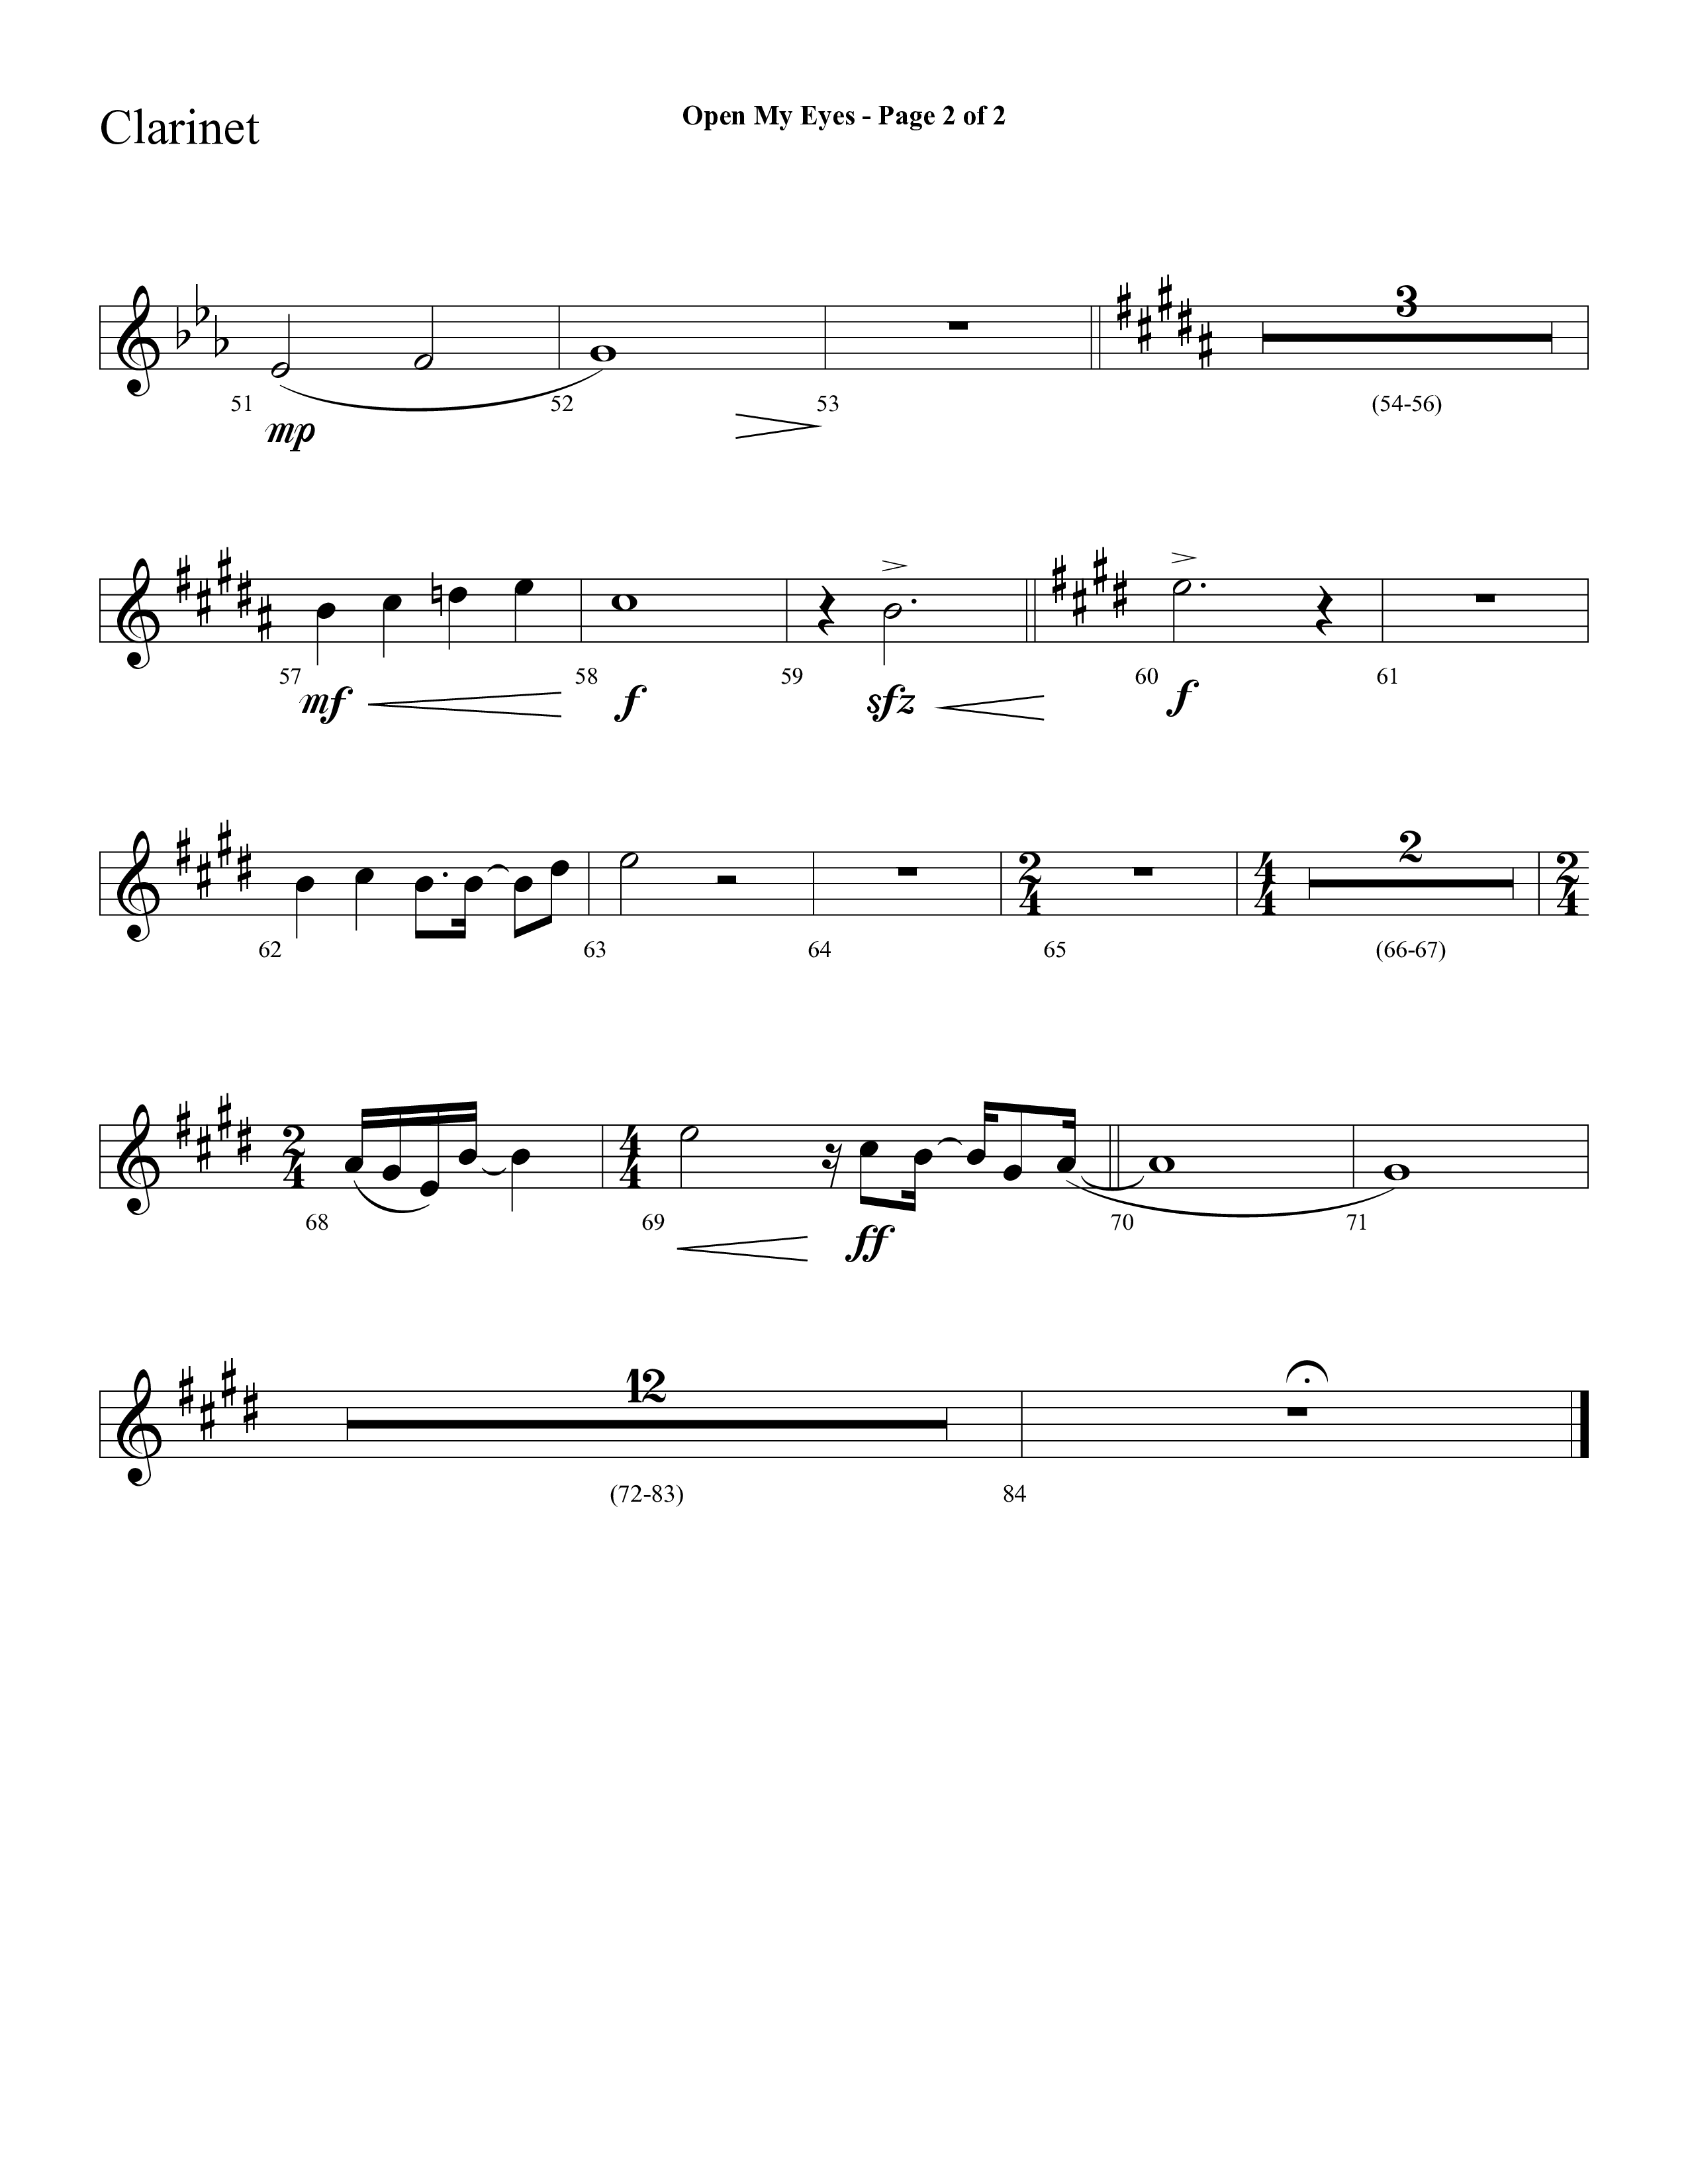 Open My Eyes (with Be Thou My Vision) (Choral Anthem SATB) Clarinet 1/2 (Arr. Cliff Duren / Lifeway Choral)